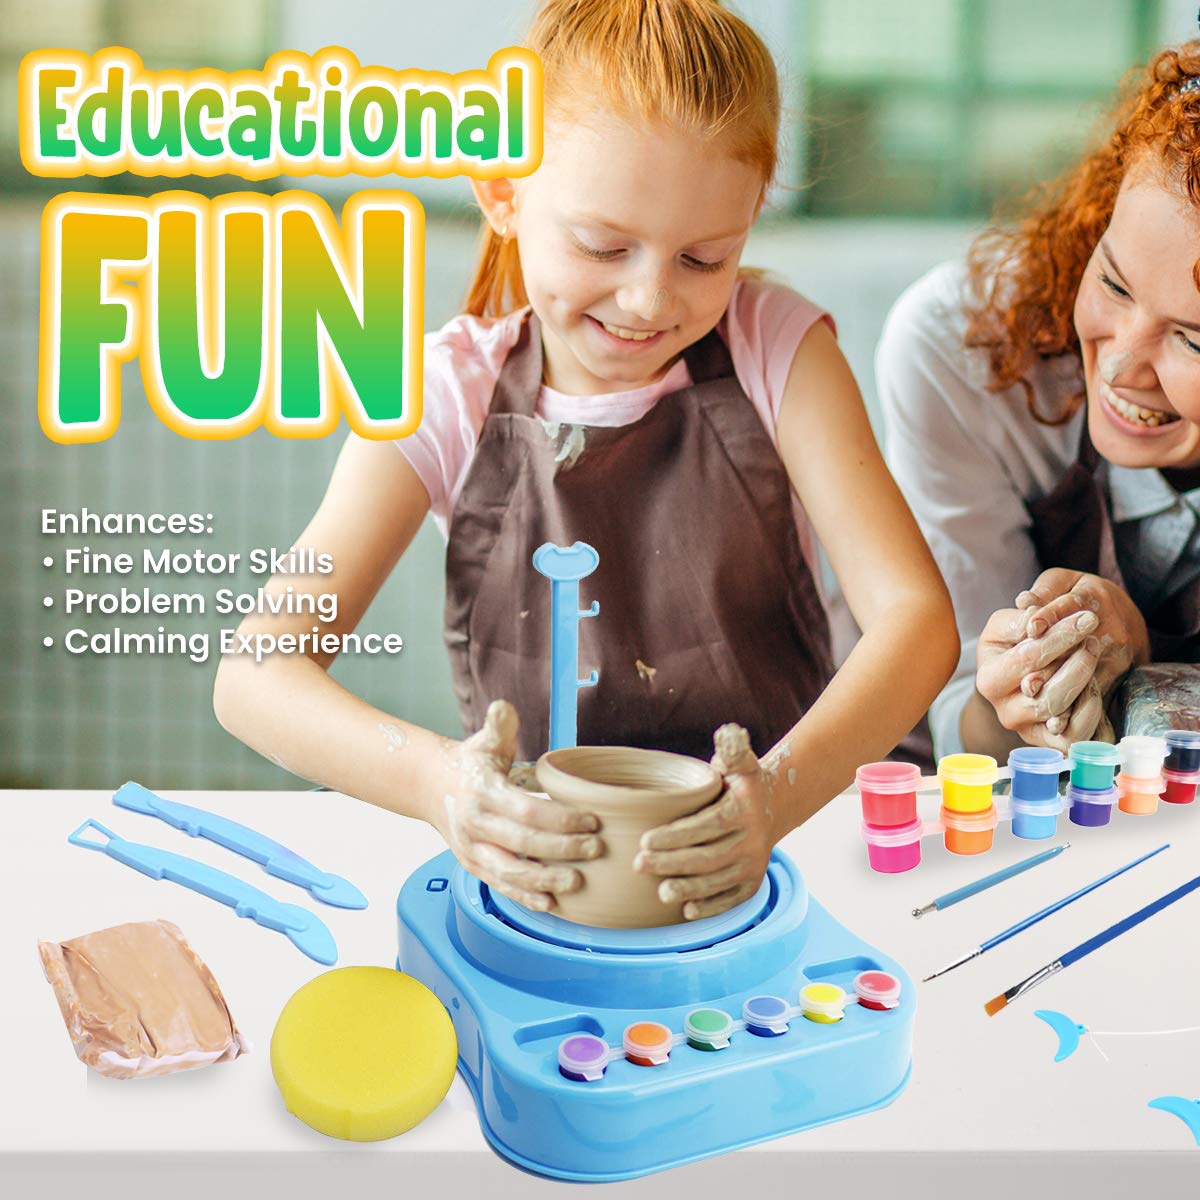 Insnug Kids Pottery Wheel Kit - Complete Pottery Wheel and Painting Kit for Beginners with Modeling Clay, Sculpting Clay and Sculpting Tools, Arts & Crafts, Craft Kits for Kids Age 8-12, 9-12